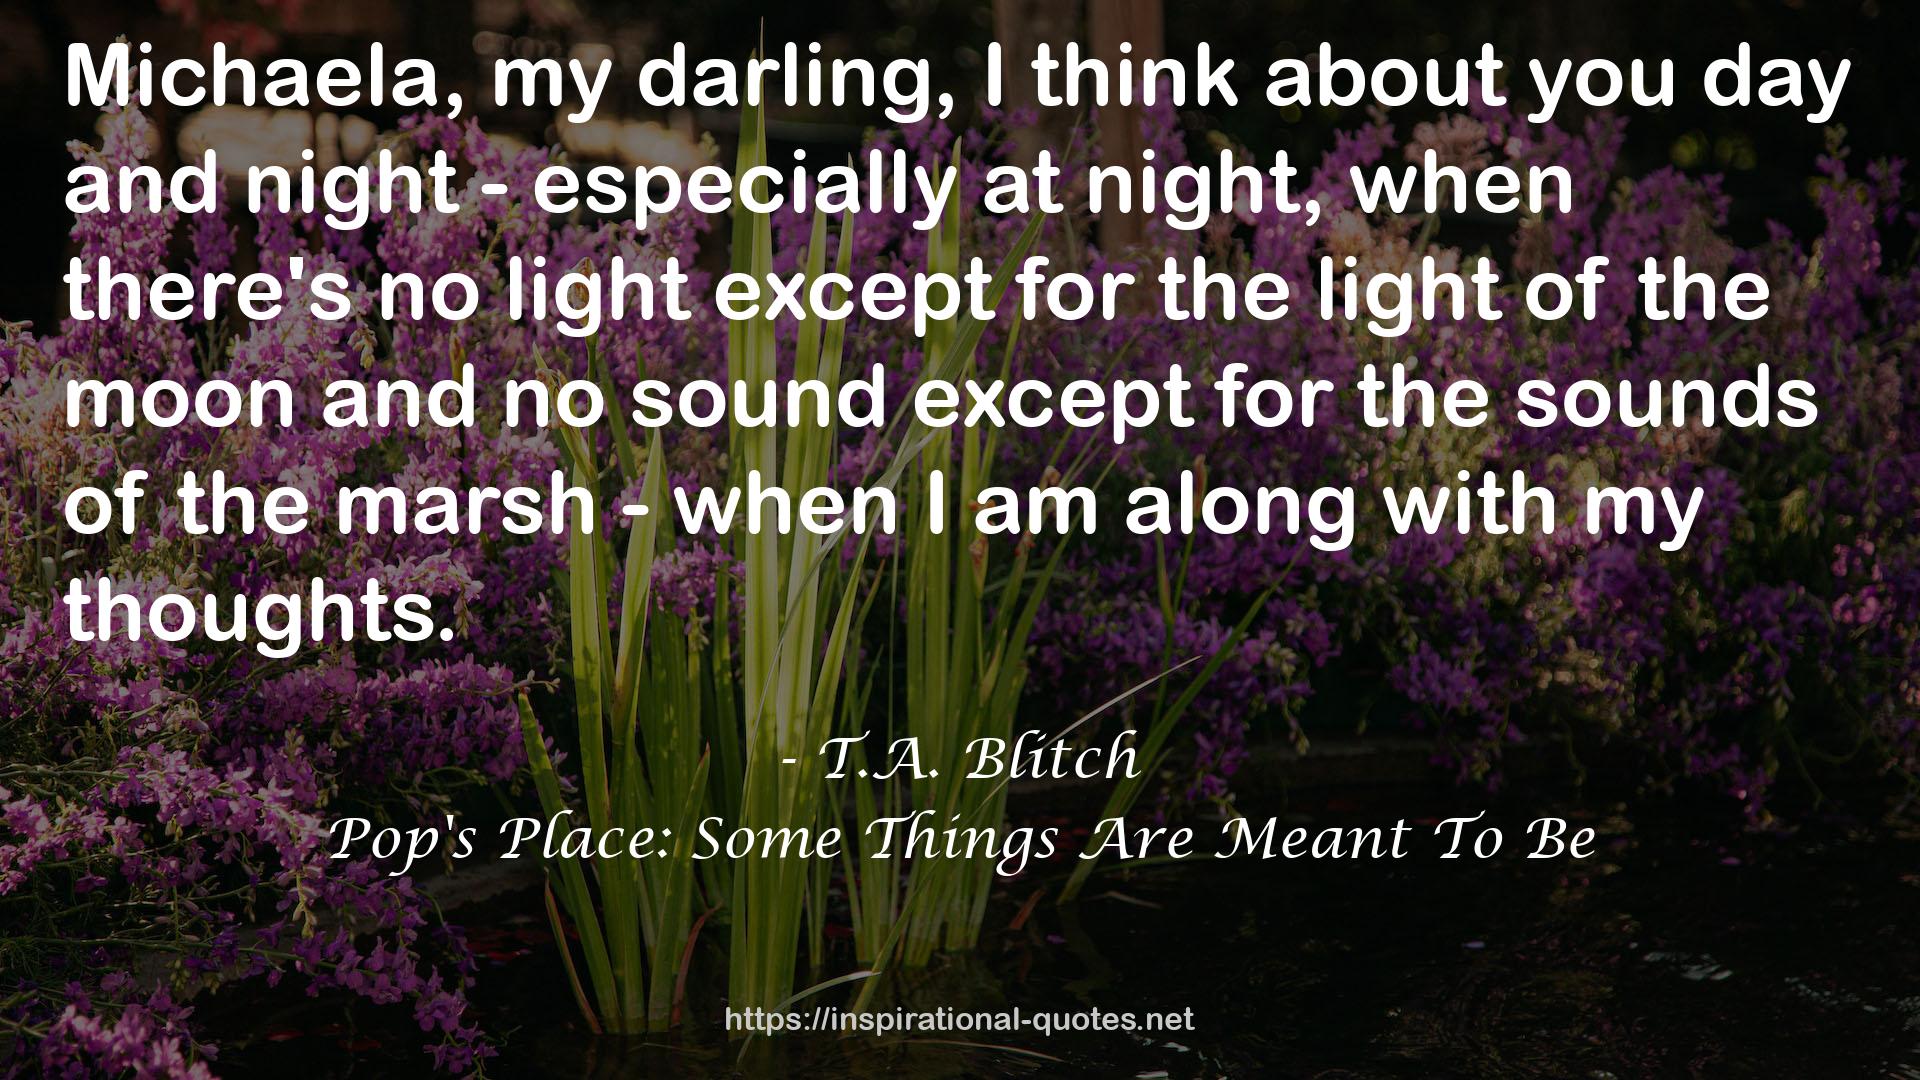 T.A. Blitch QUOTES